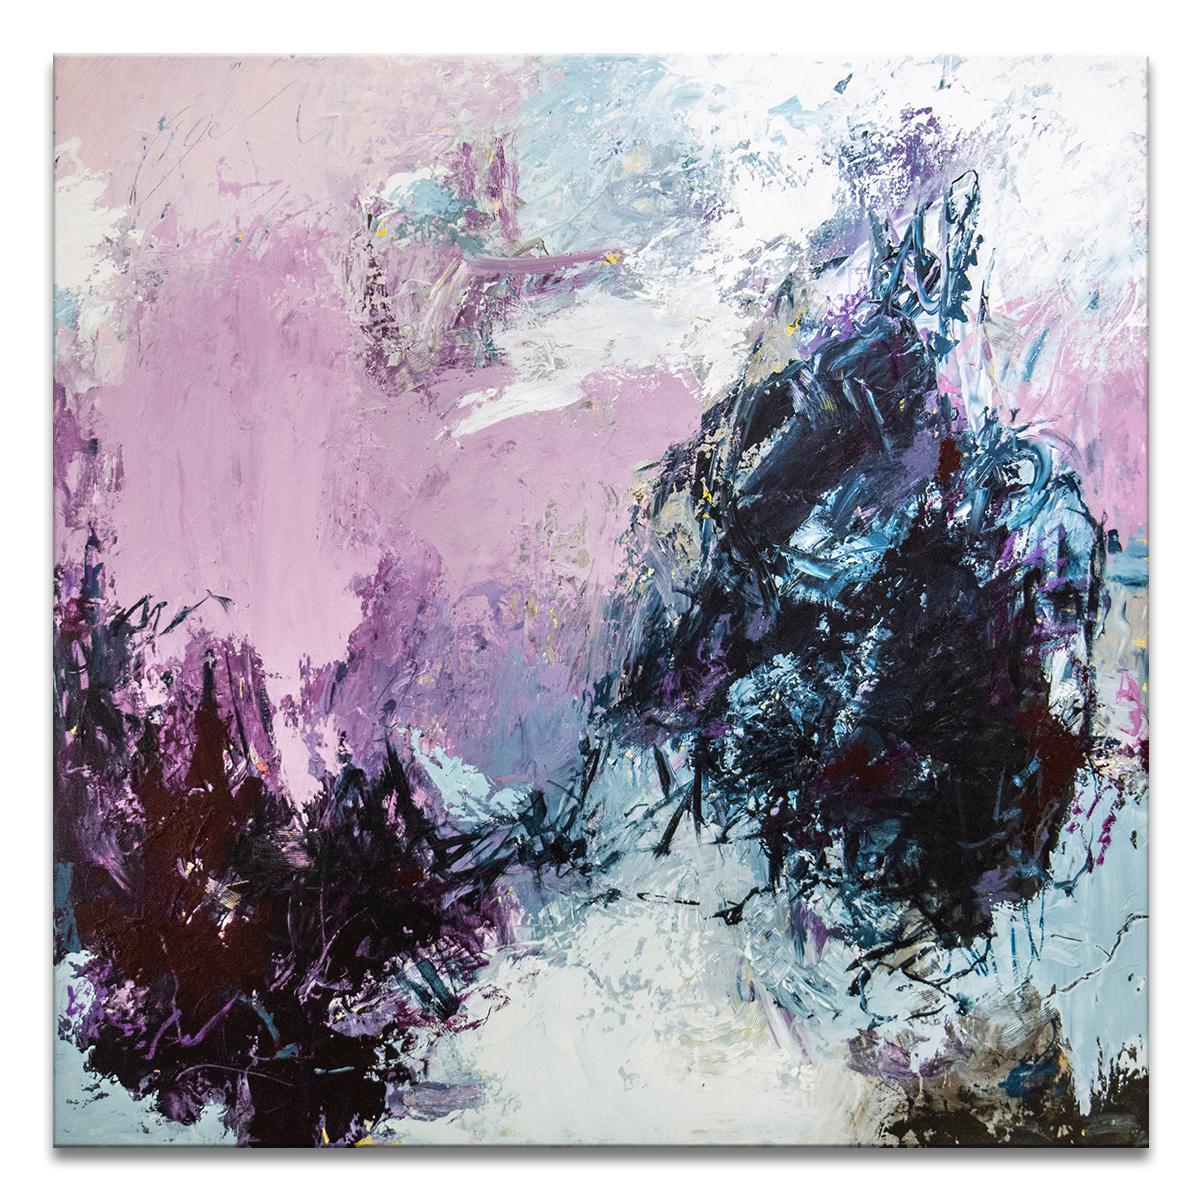 ‘Essence' Wrapped Canvas Original Painting features a vibrant abstract aesthetic in tones of purple, blush, blue, gray, eggplant, yellow, and brown. Inspired by nature and Bible verse Samuel 1:11, Tammy Staab’s positivity and light radiates through